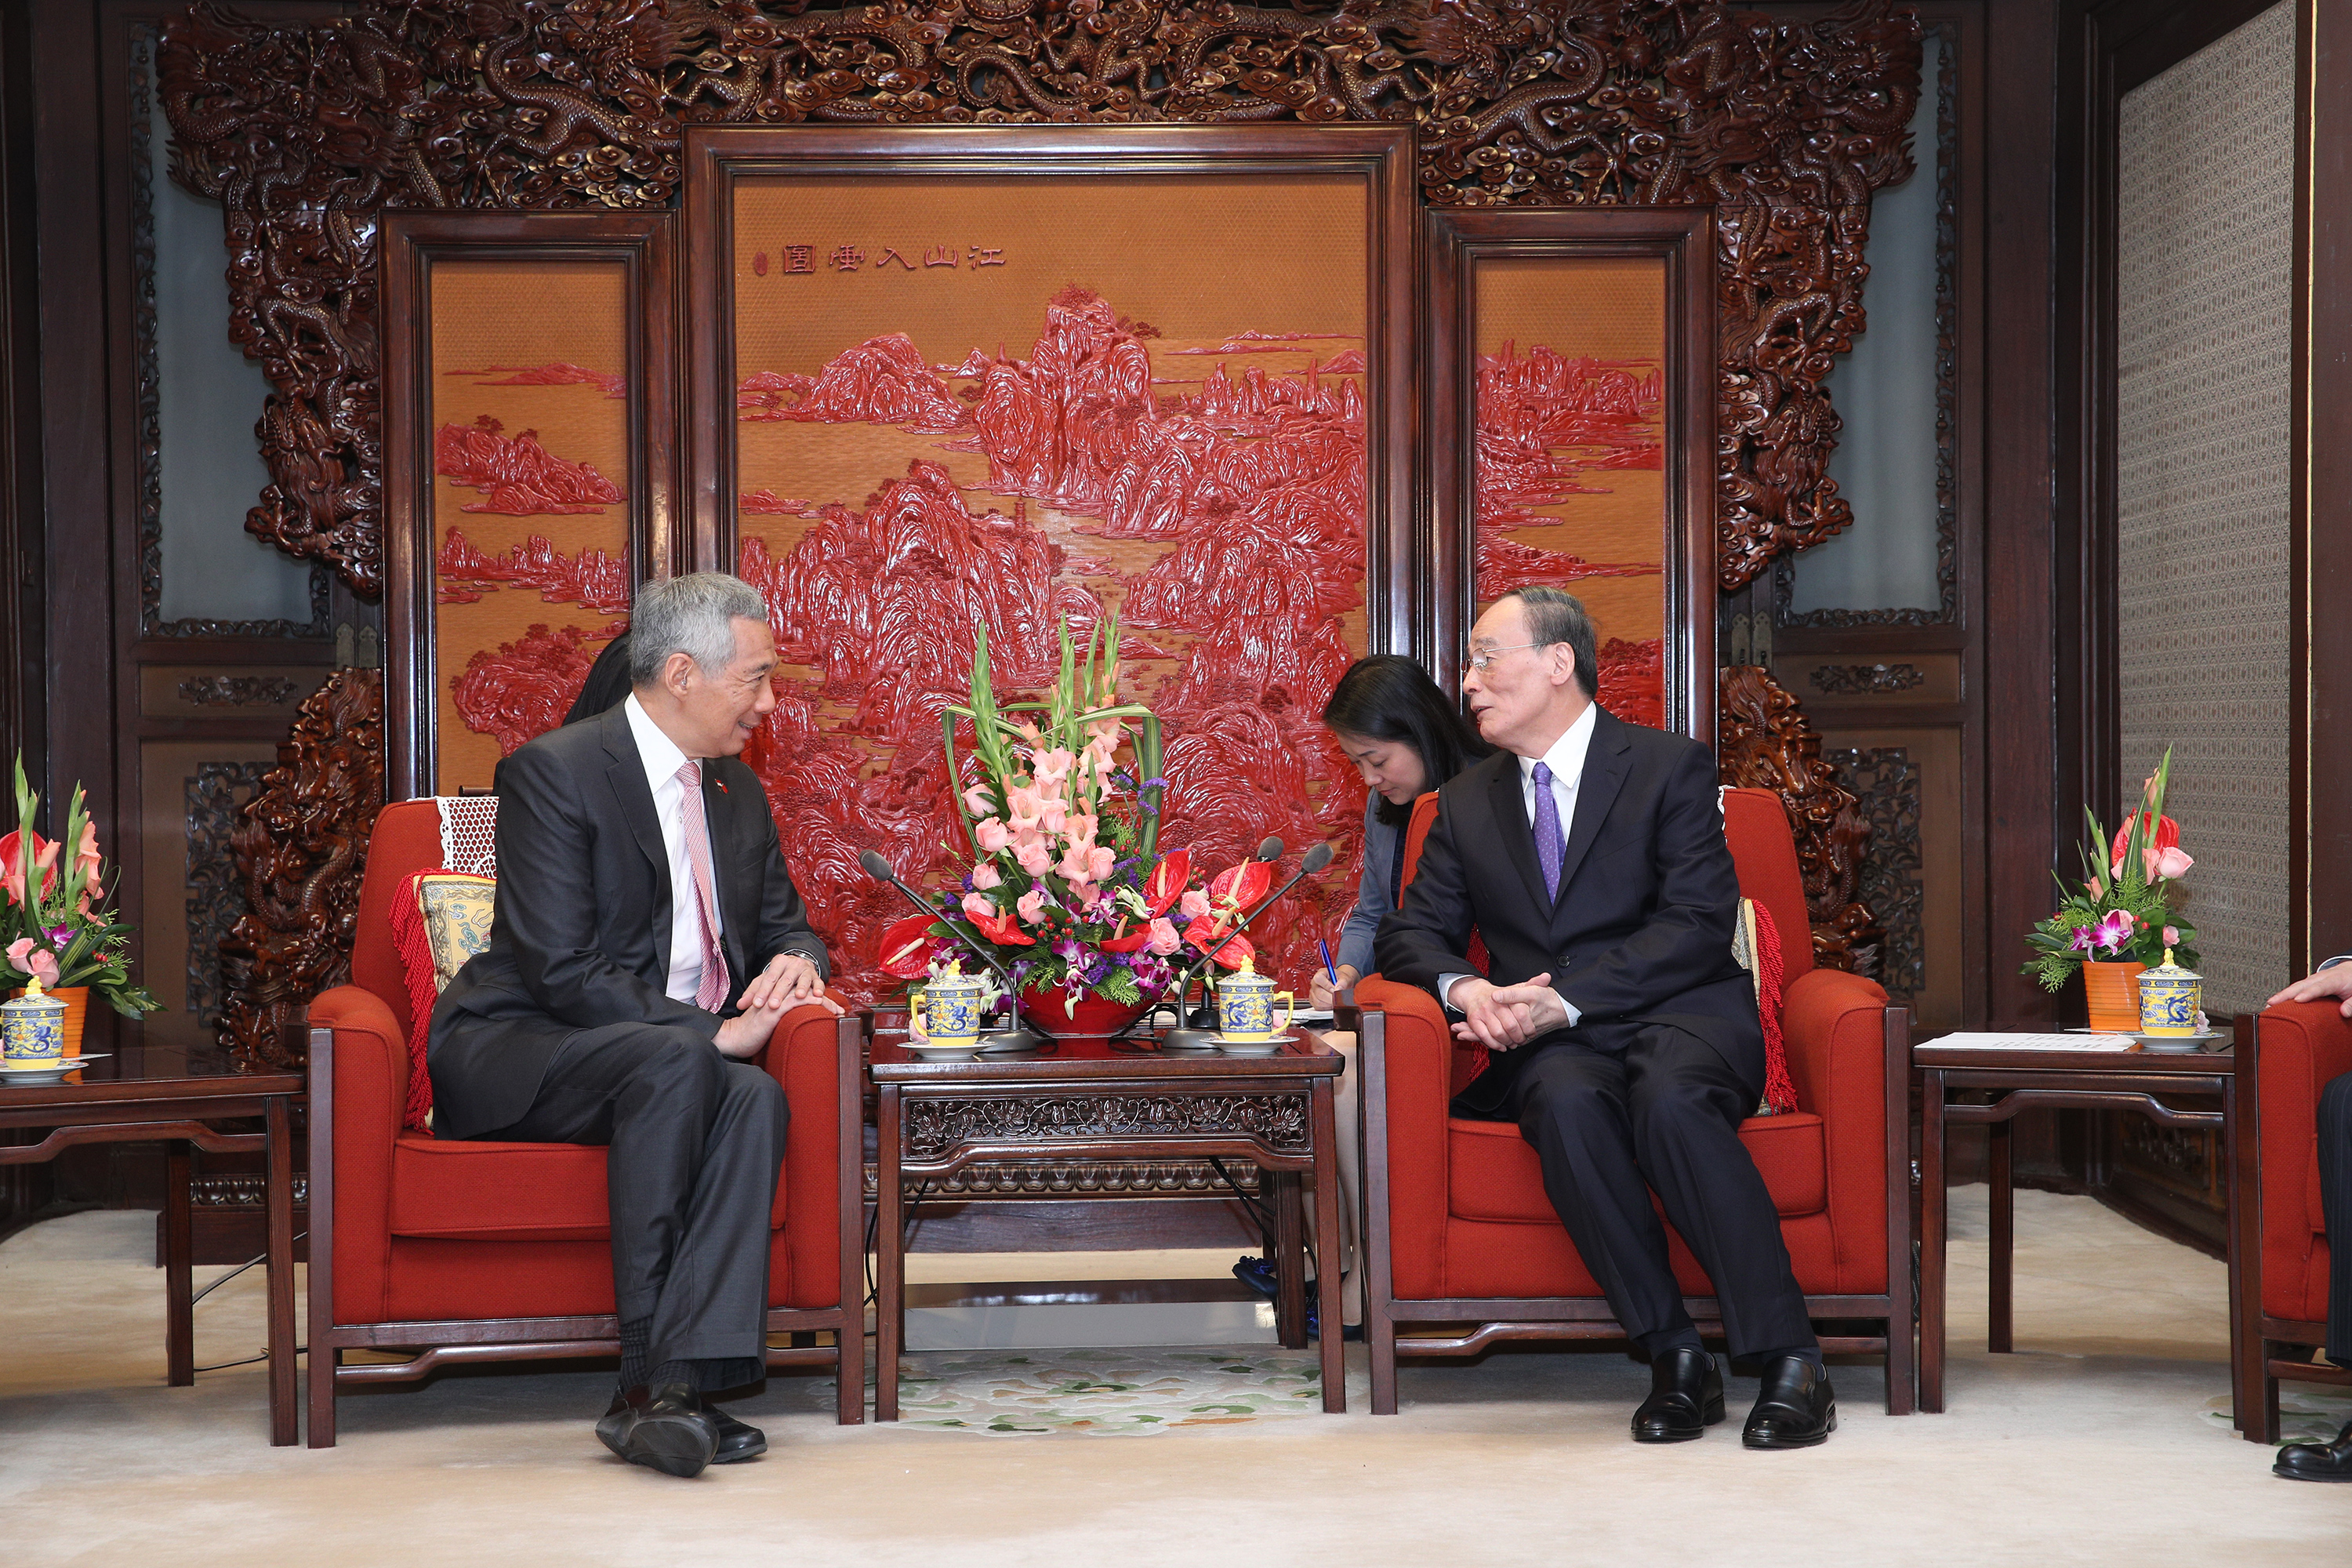 PM Lee Hsien Loong meeting Mr Wang Qishan on 20 Sep 2017 (MCI Photo by Chwee)